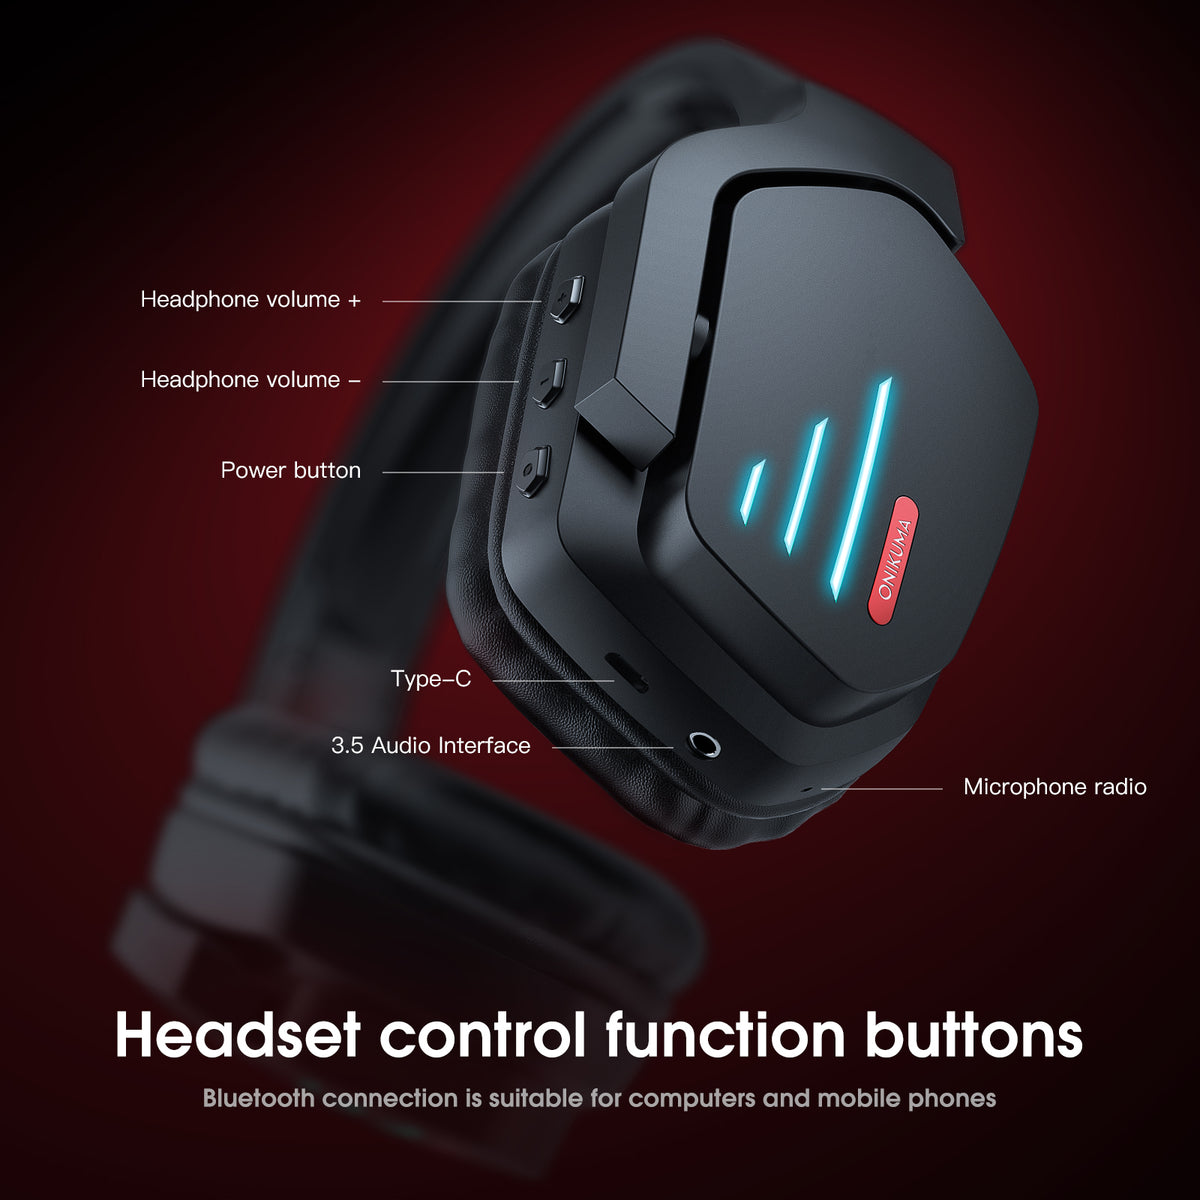 Headset control function buttons